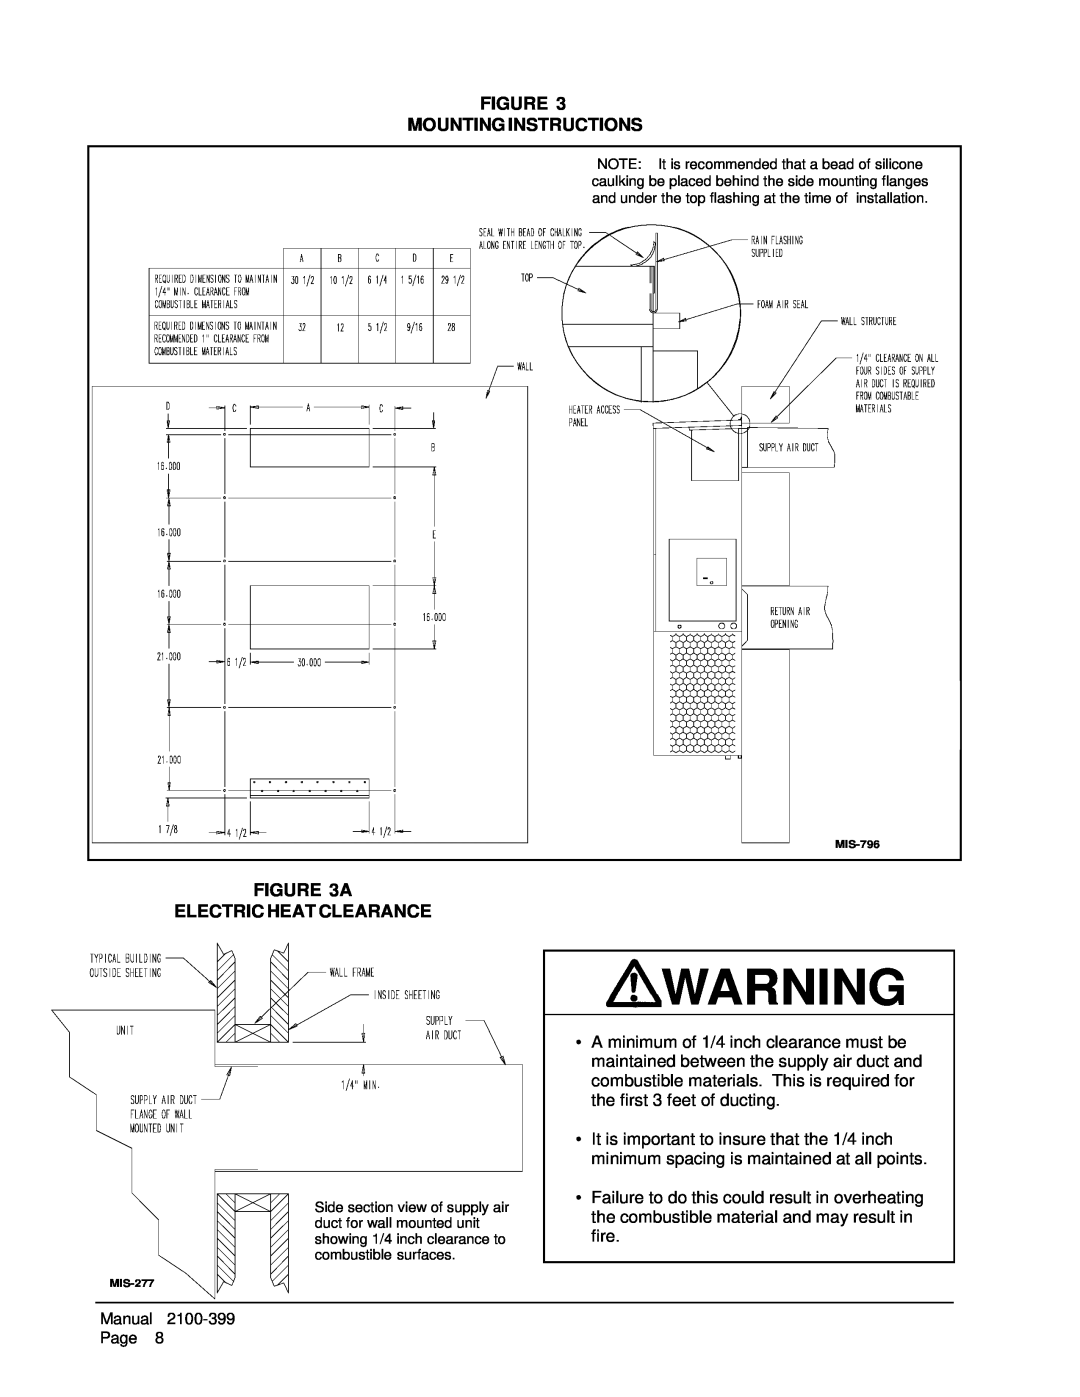 Bard WH483, WH602, WH421 installation instructions Figure Mounting Instructions, A Electric Heat Clearance, MIS-796, MIS-277 